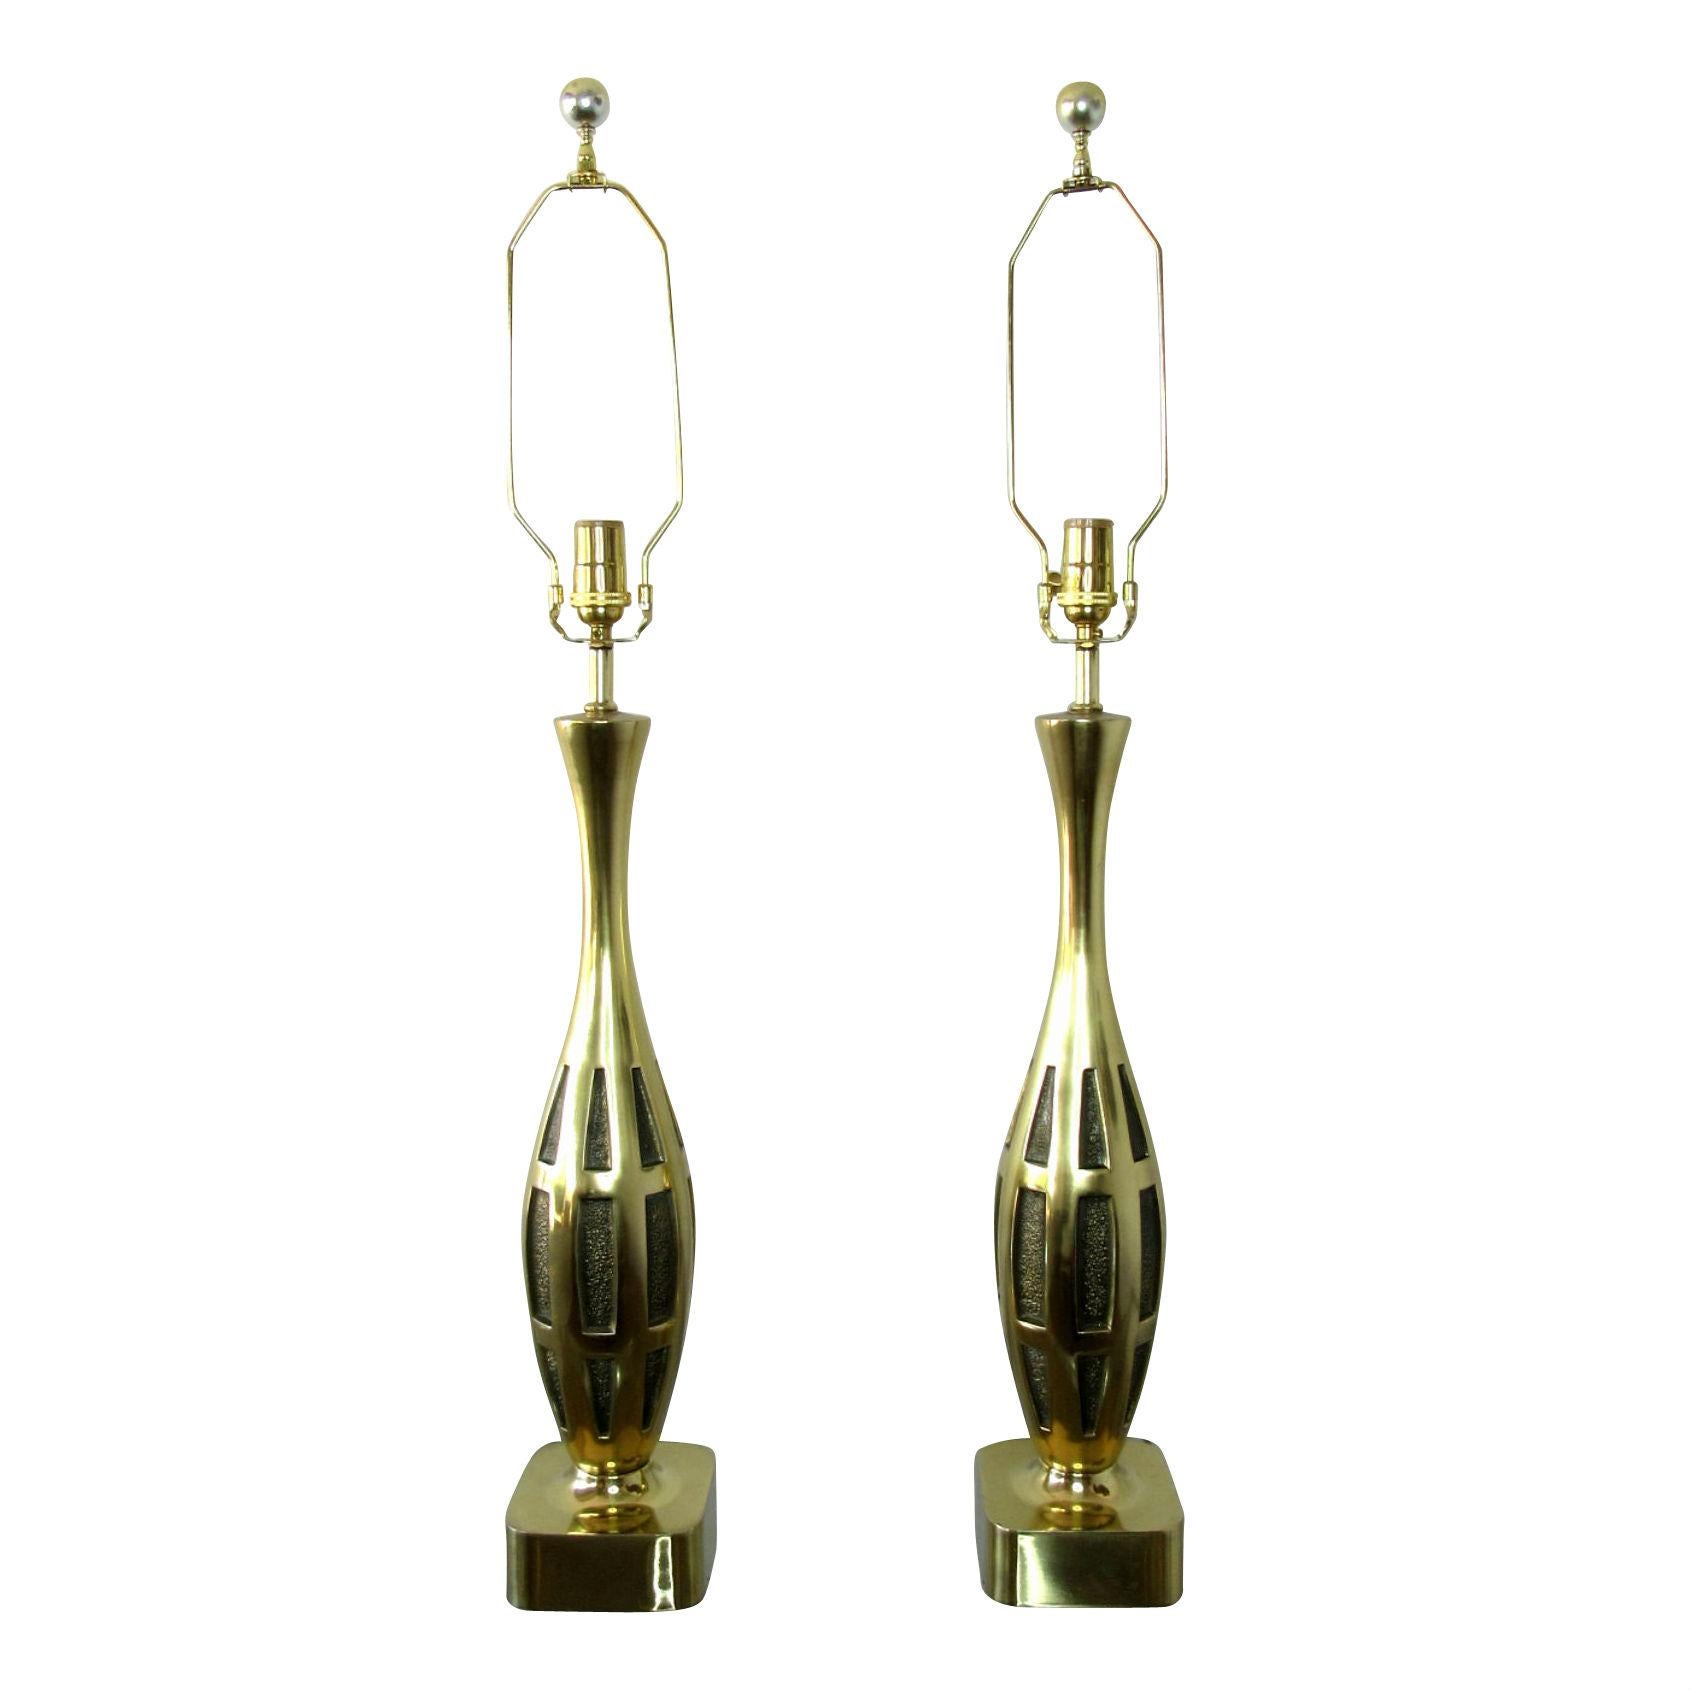 Fantastic pair of Midcentury Modern brass table lamps designed by Tony Paul for Westwood Lighting. 
Rewired for use in the USA.